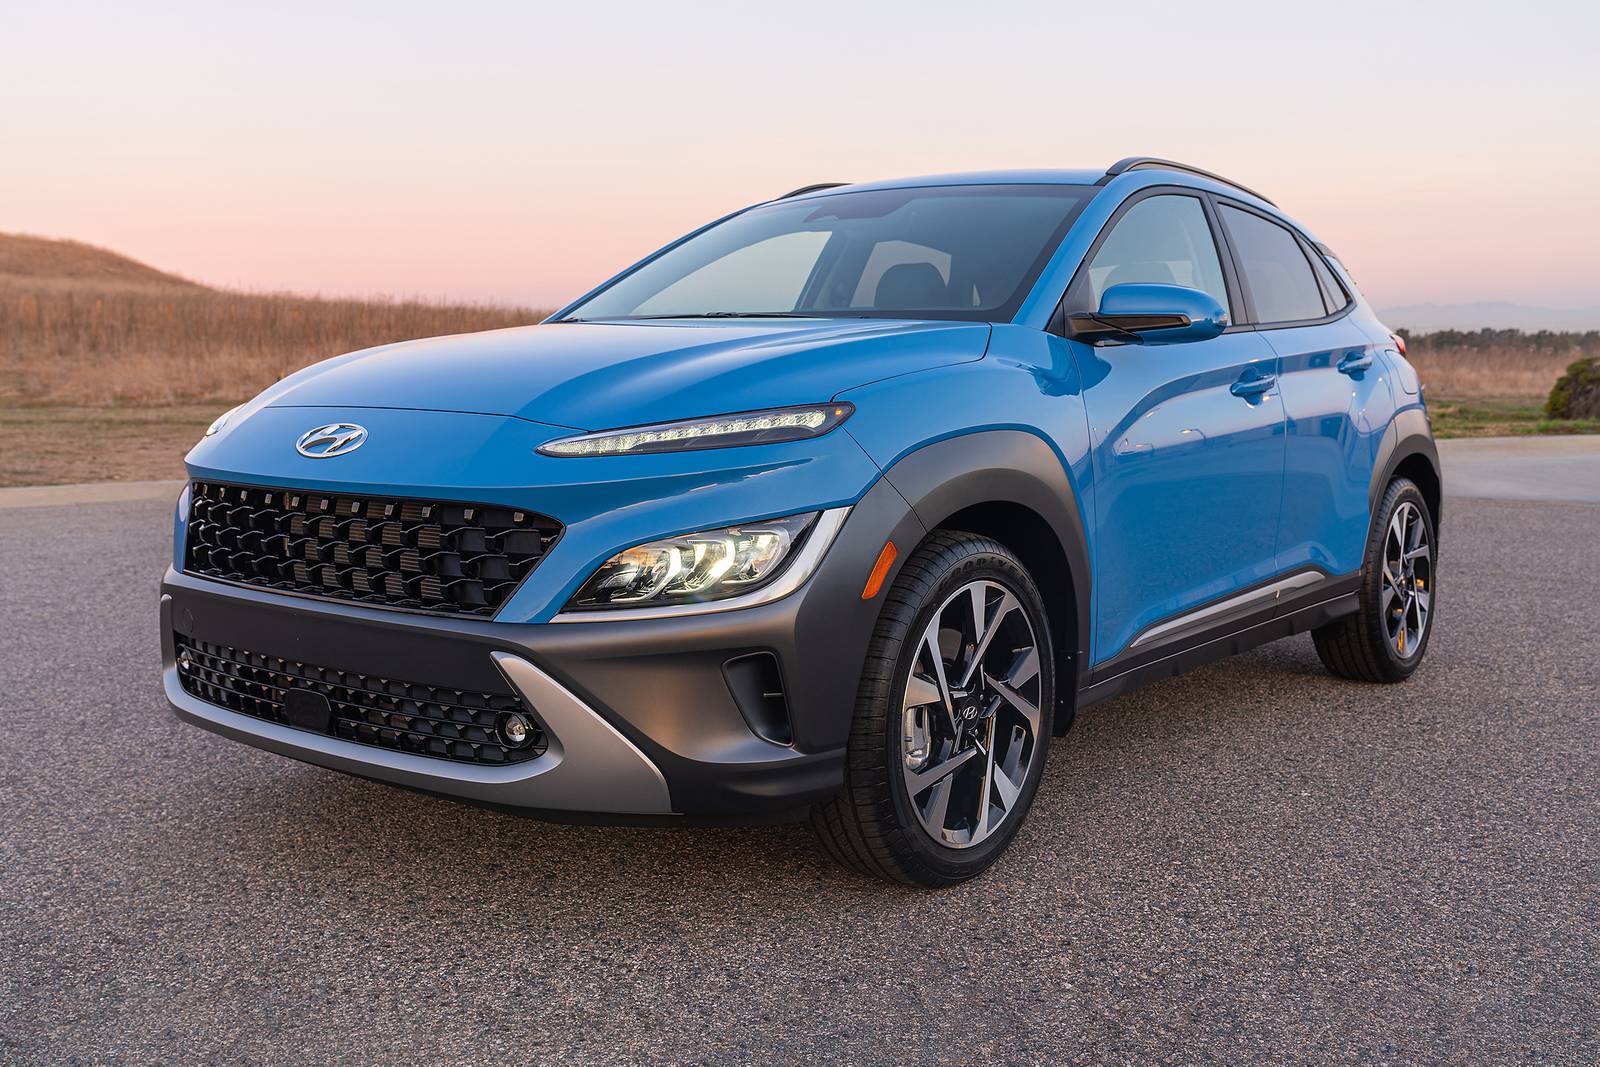 20 Hyundai Kona Prices, Reviews, and Pictures   Edmunds